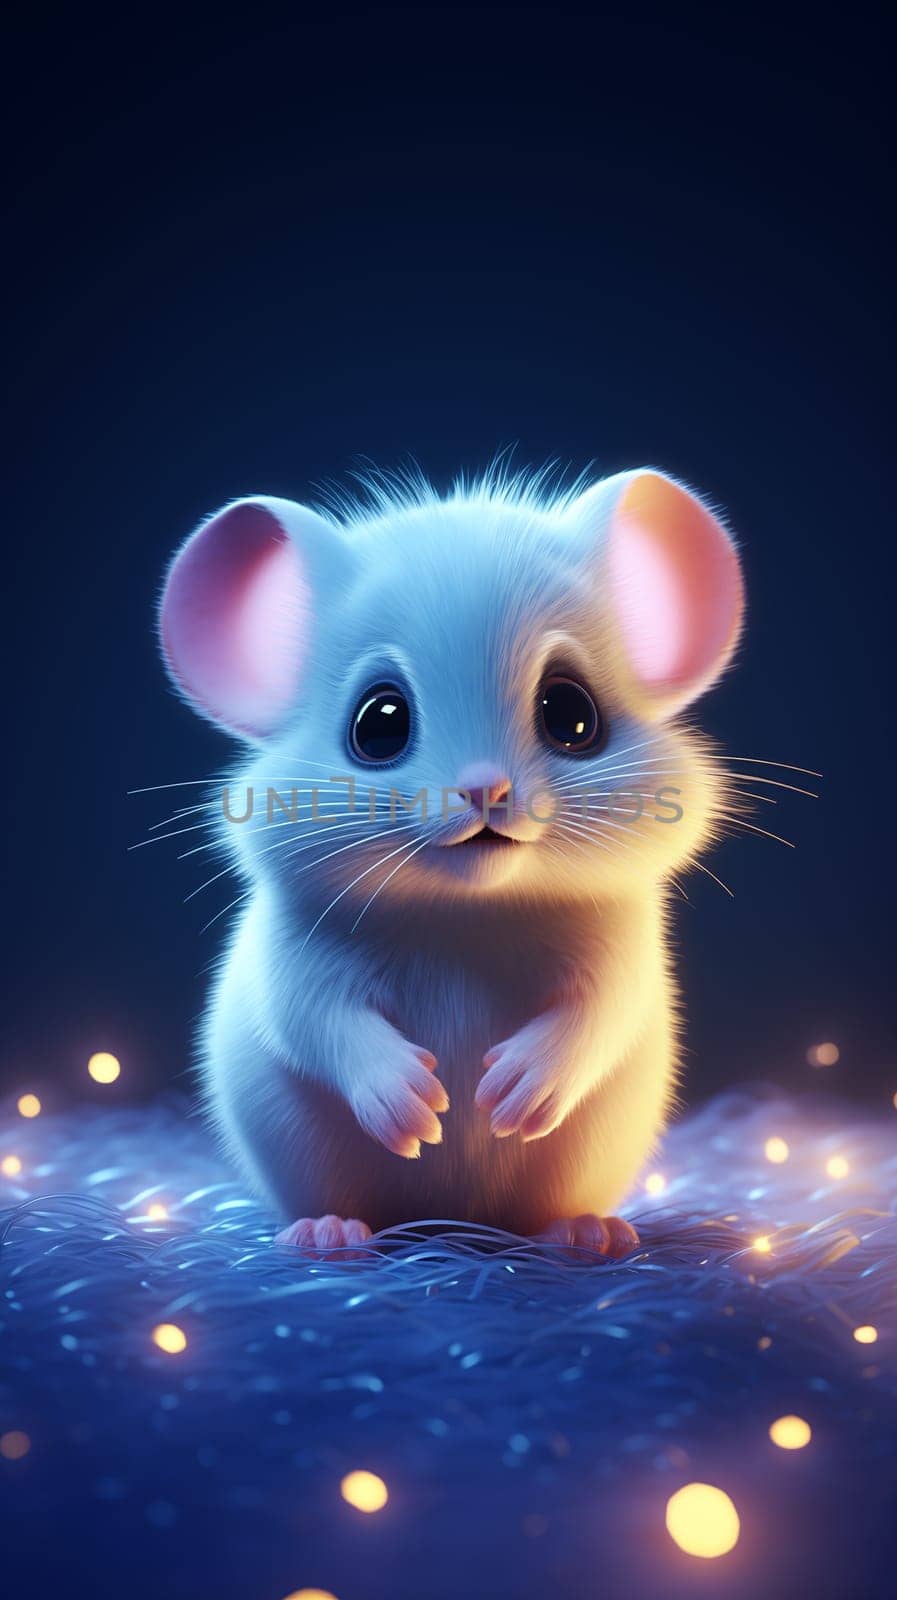 An adorable and funny little cartoon mouse with big eyes and ears on magical background - generative AI